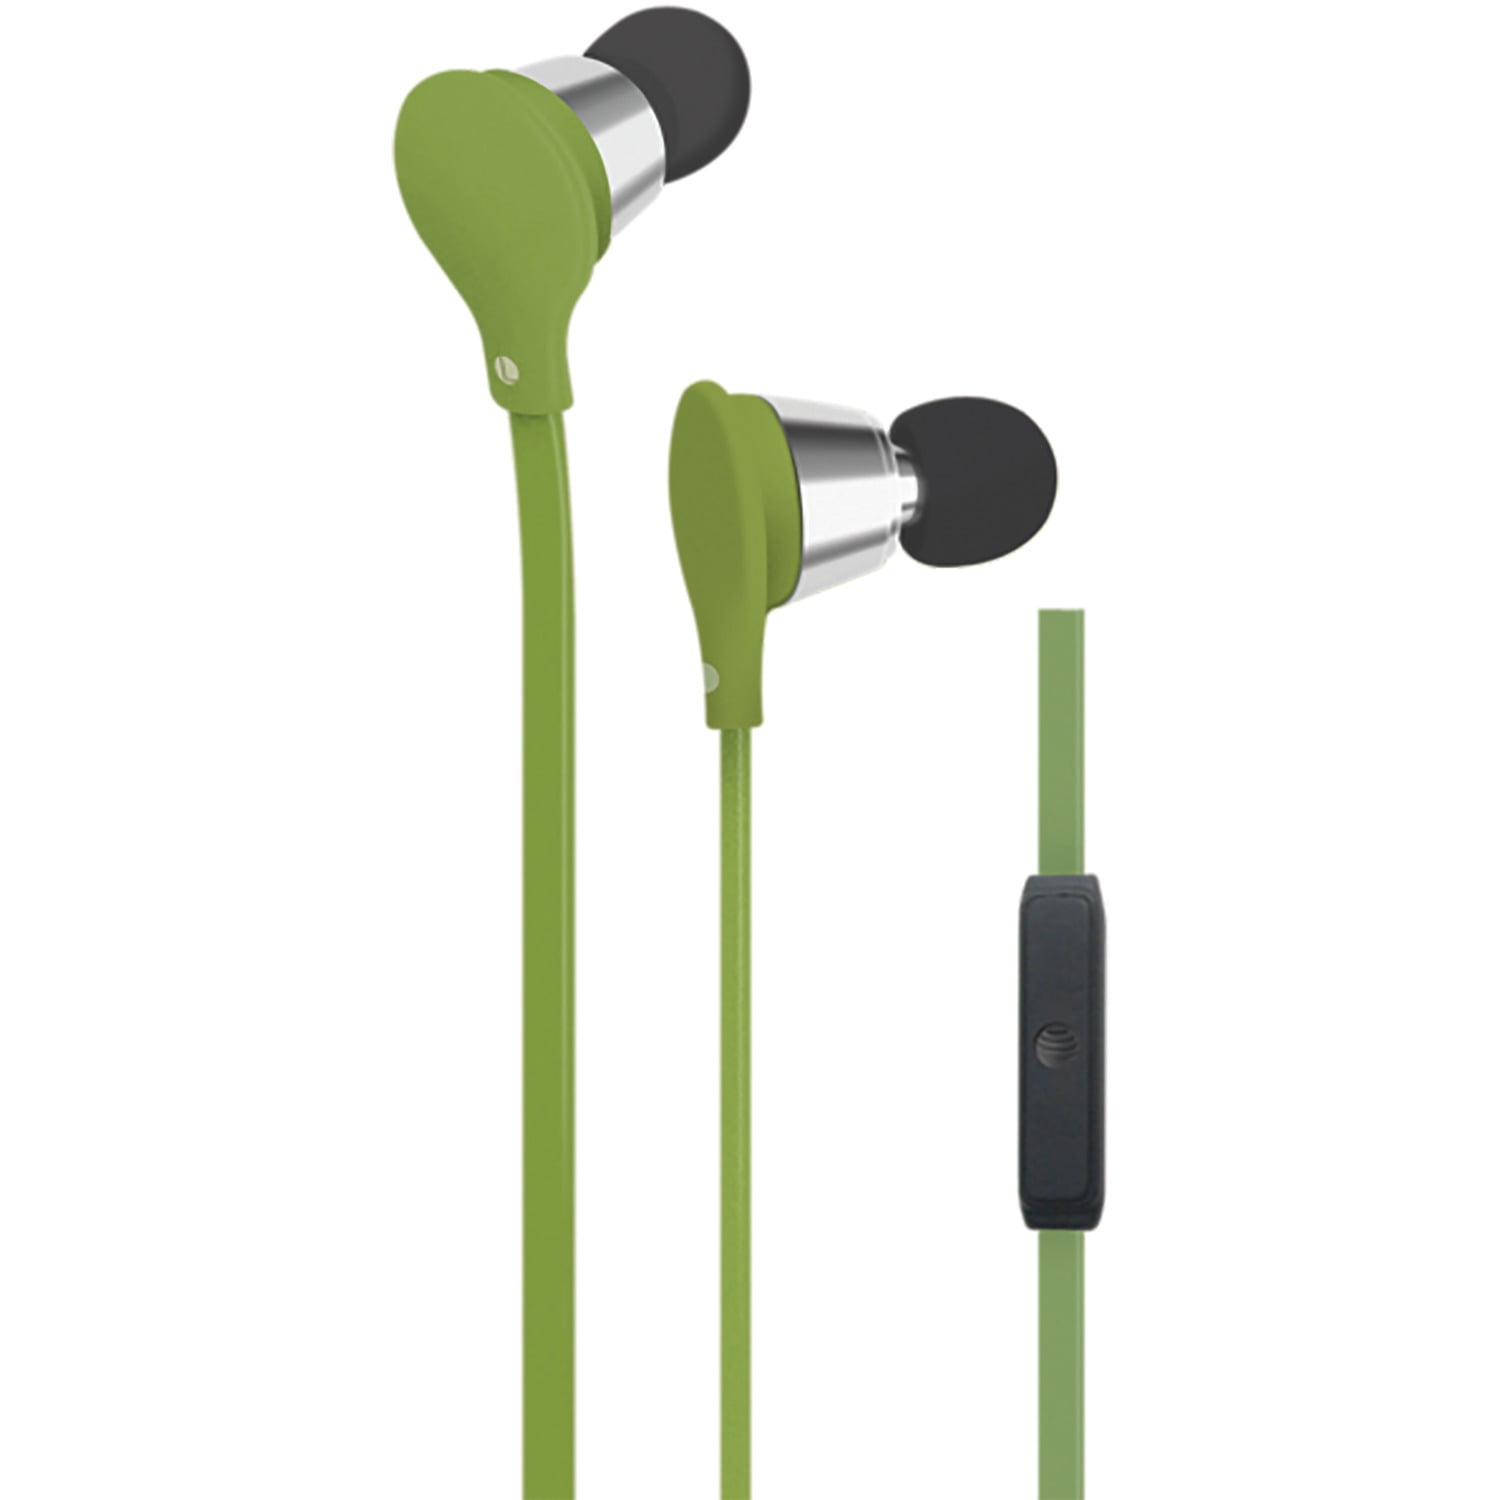 AT&T EBM01-GREEN Jive Noise-Isolating Earbuds with Microphone (Green ...